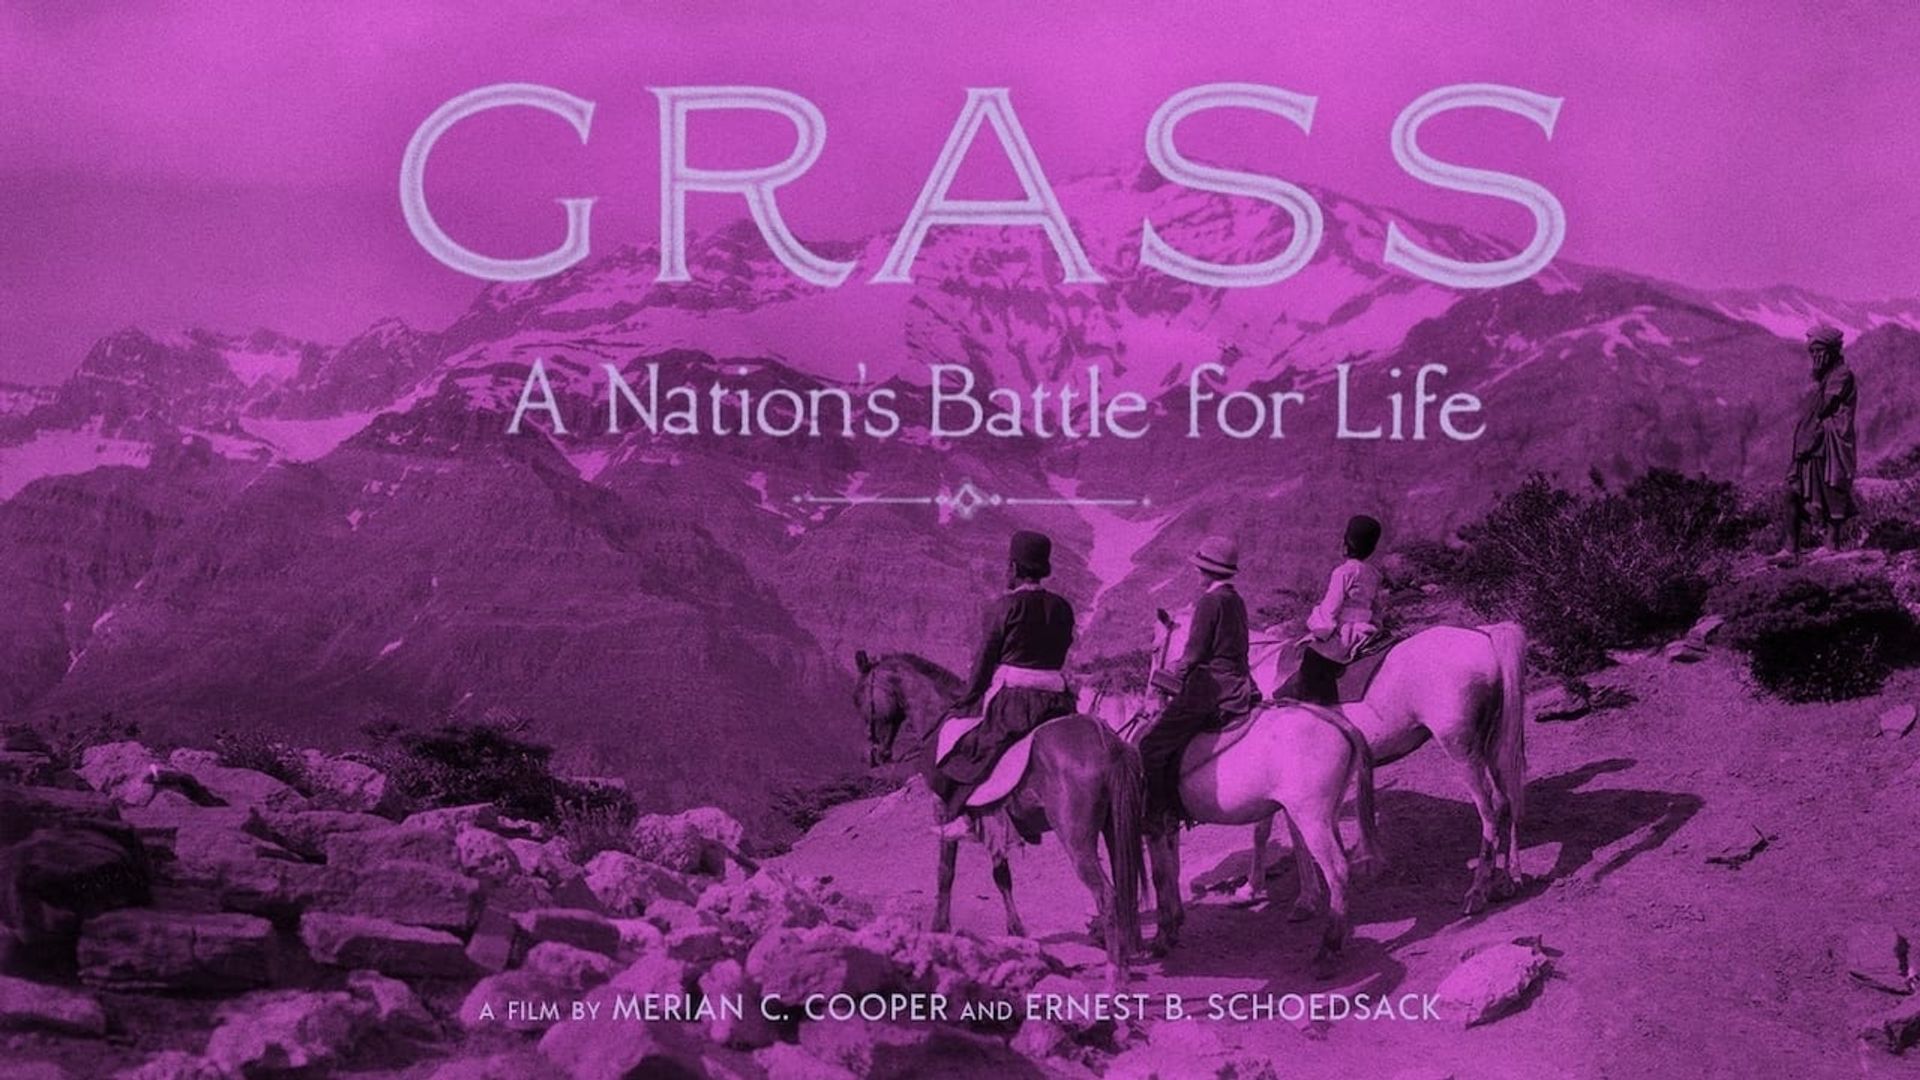 Grass: A Nation's Battle for Life background